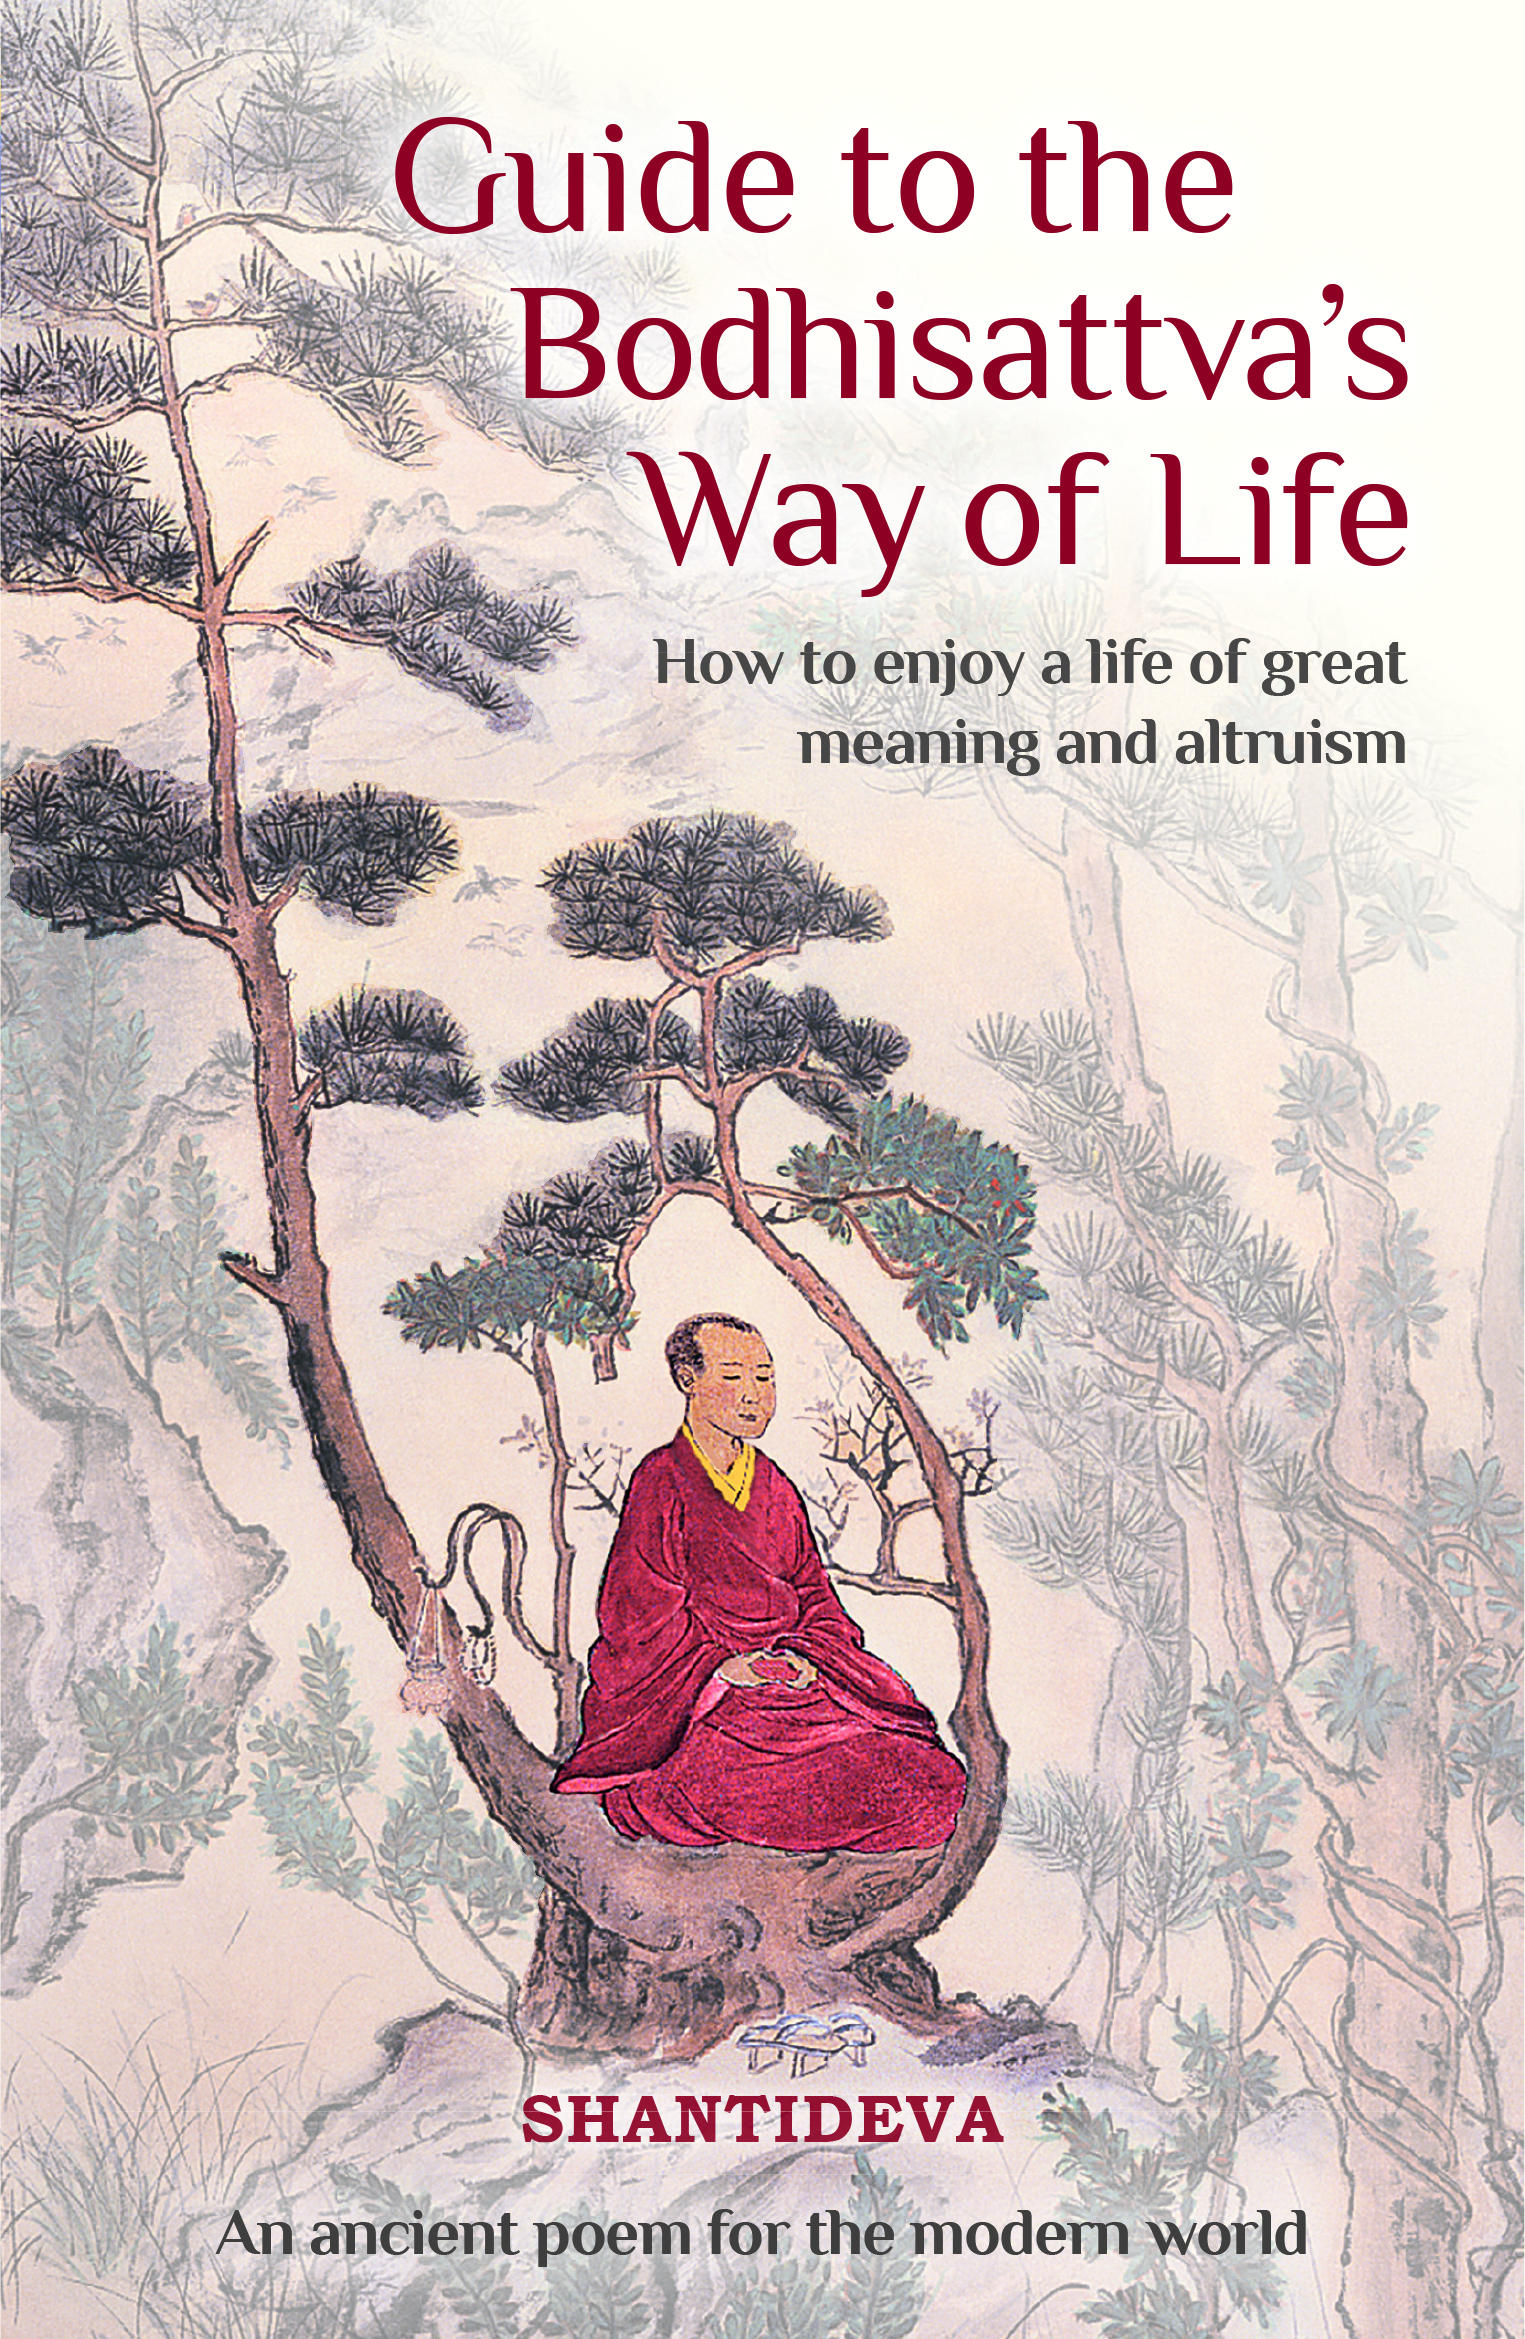 Guide to the Bodhisattvas Way of Life